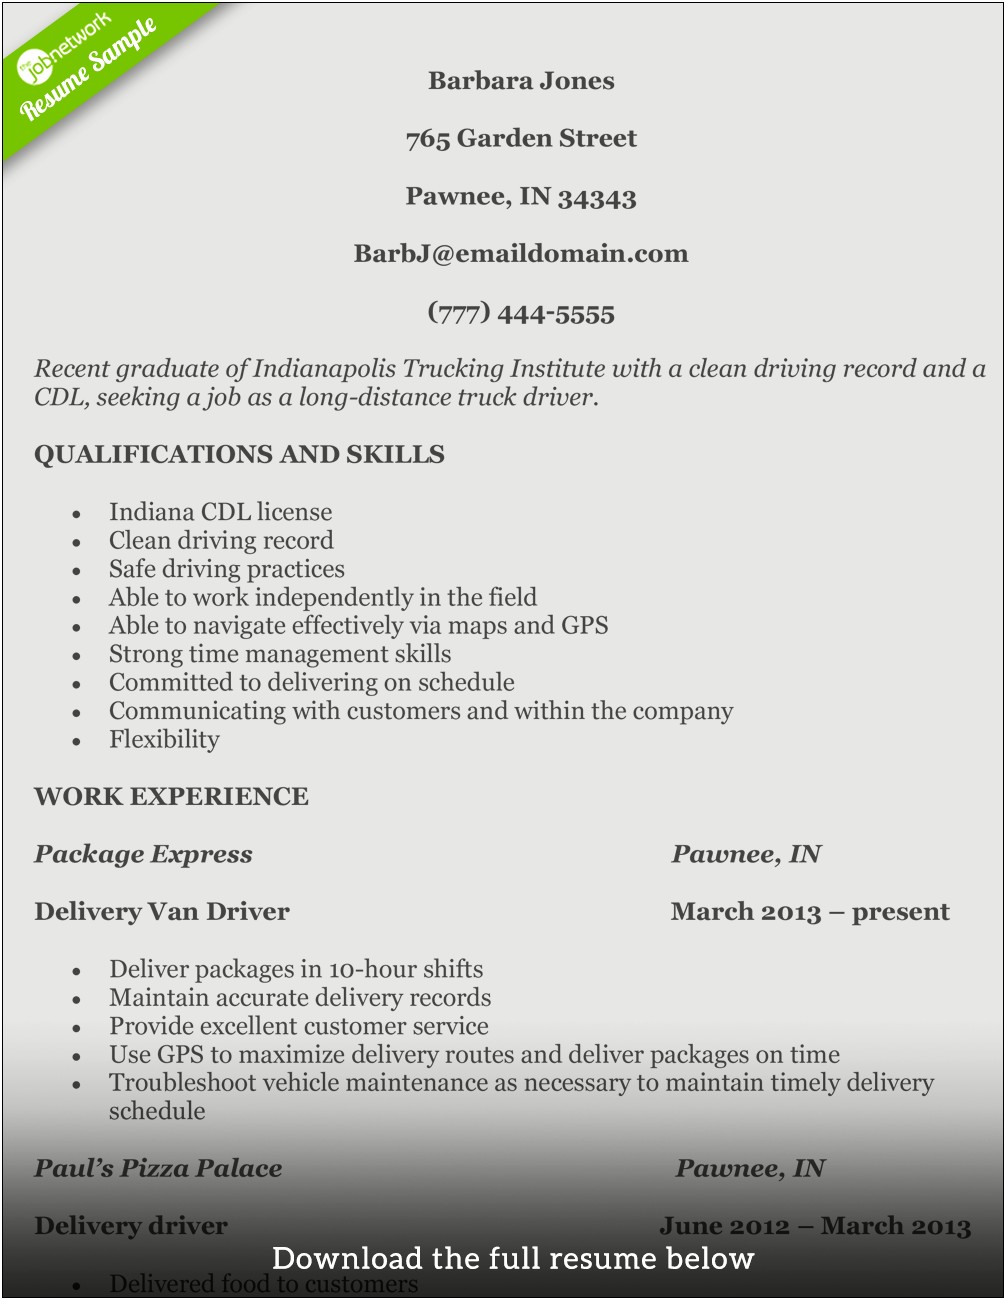 Resume Objective Samples For Pizza Delivery